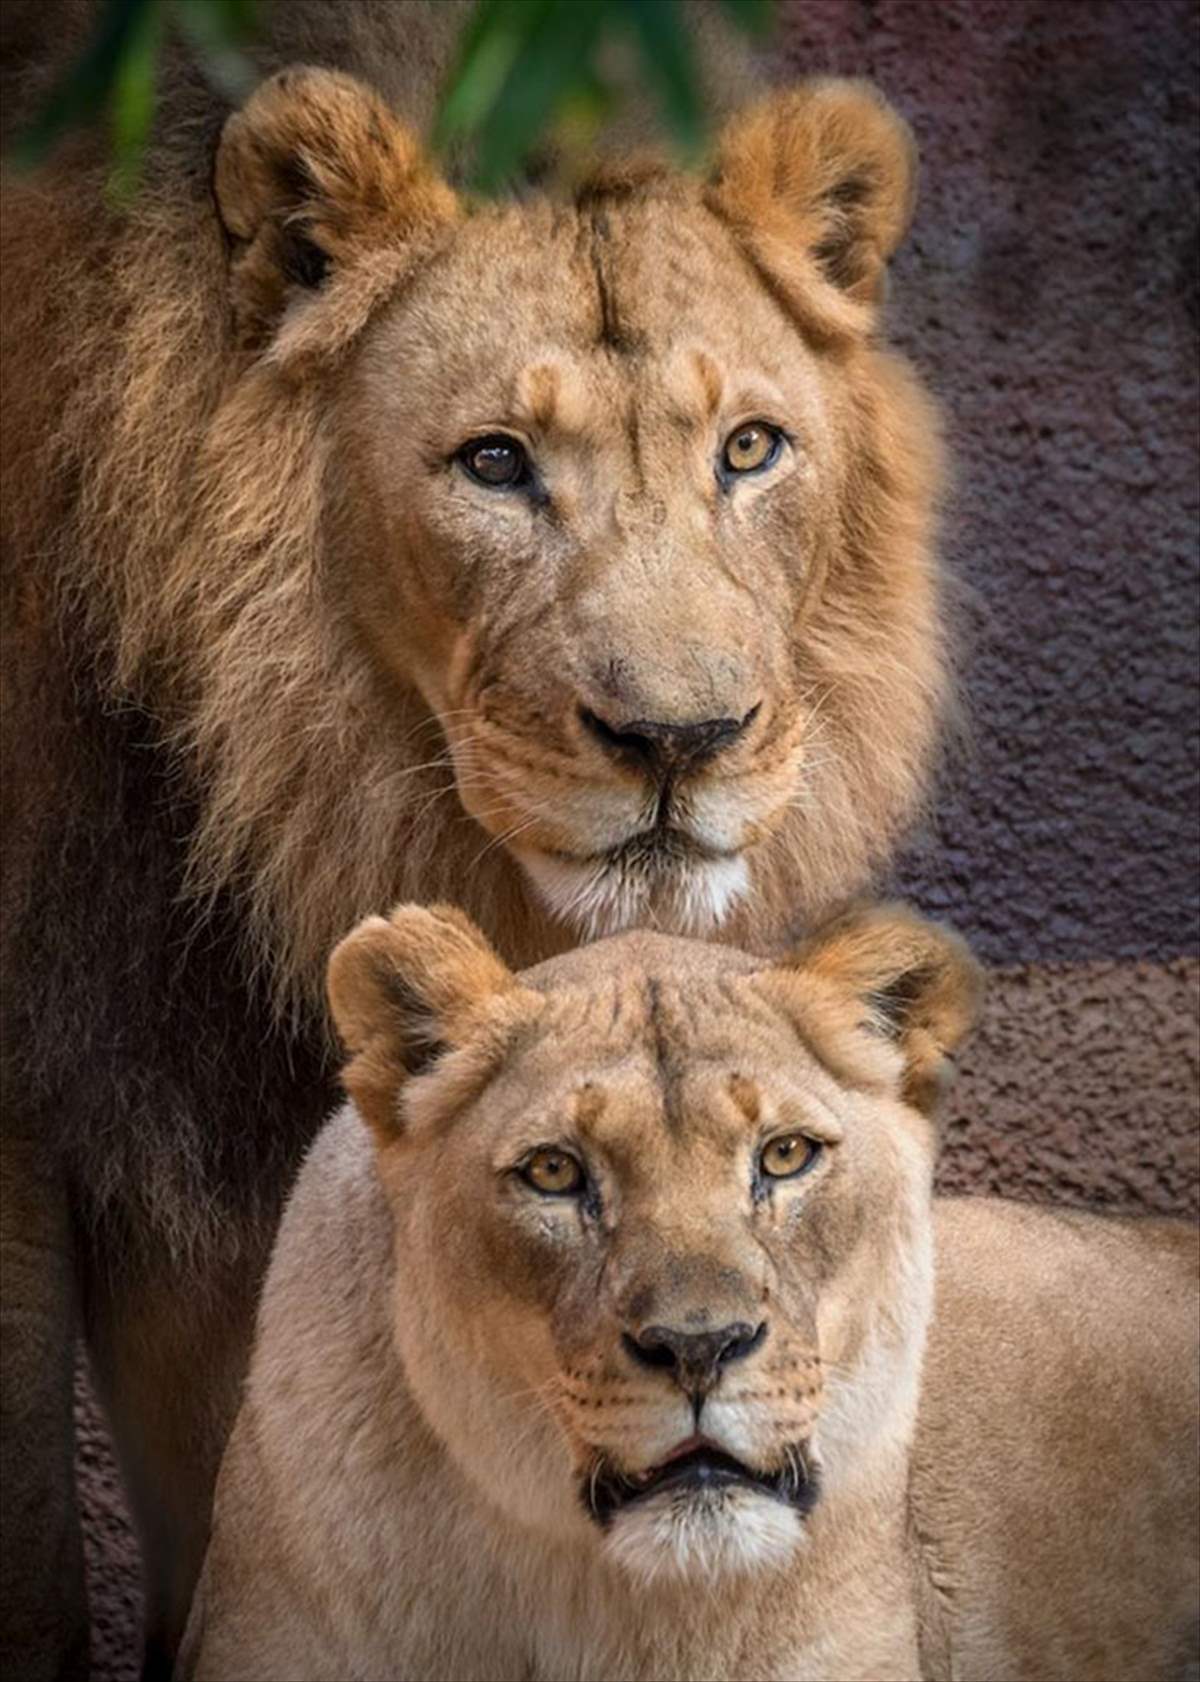 Two beautiful African lions in the zoo / Hubert and Kalisa